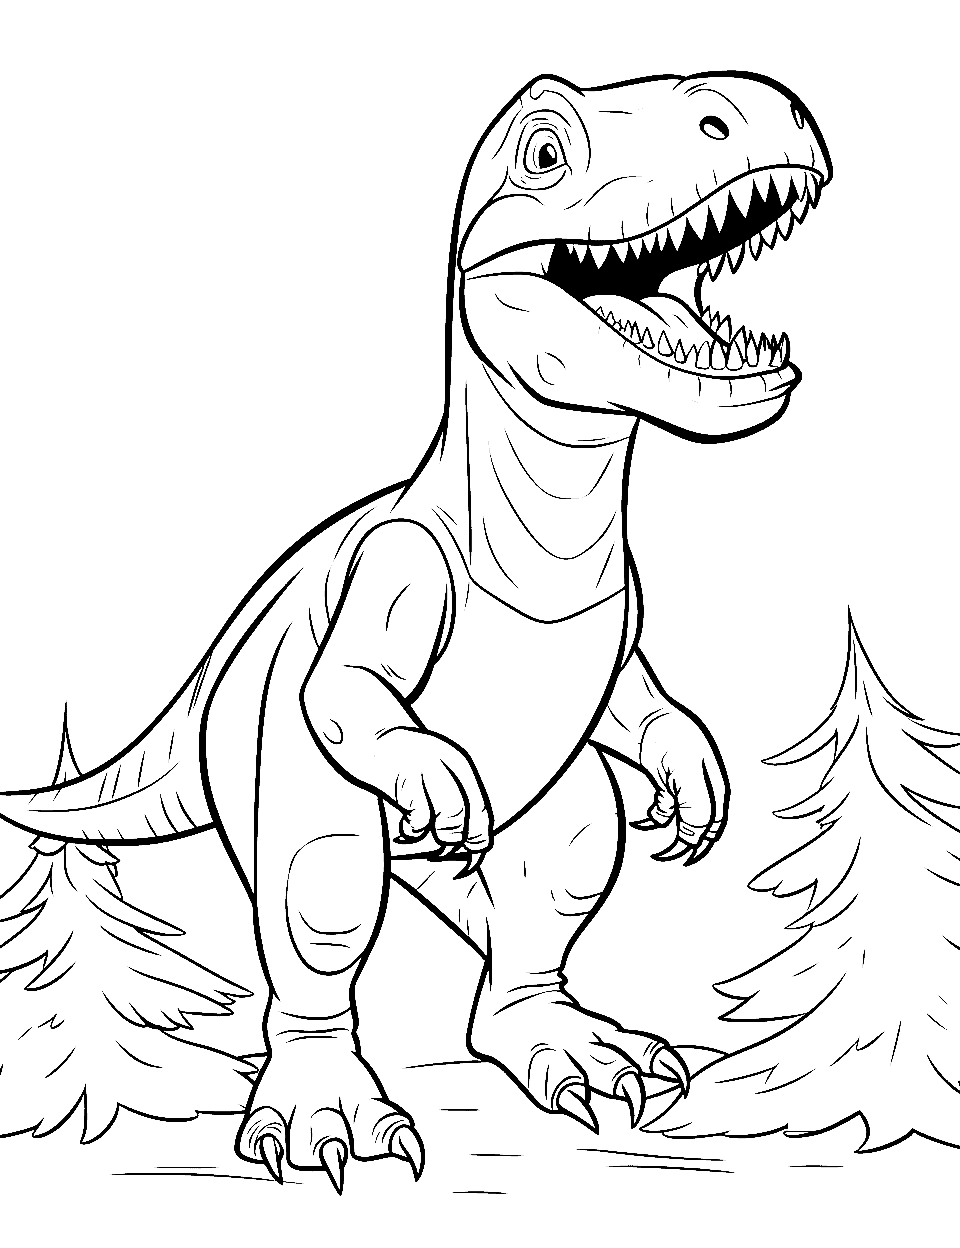 Forest T Rex T-rex Coloring Page - A T-Rex strolling around in a forest.